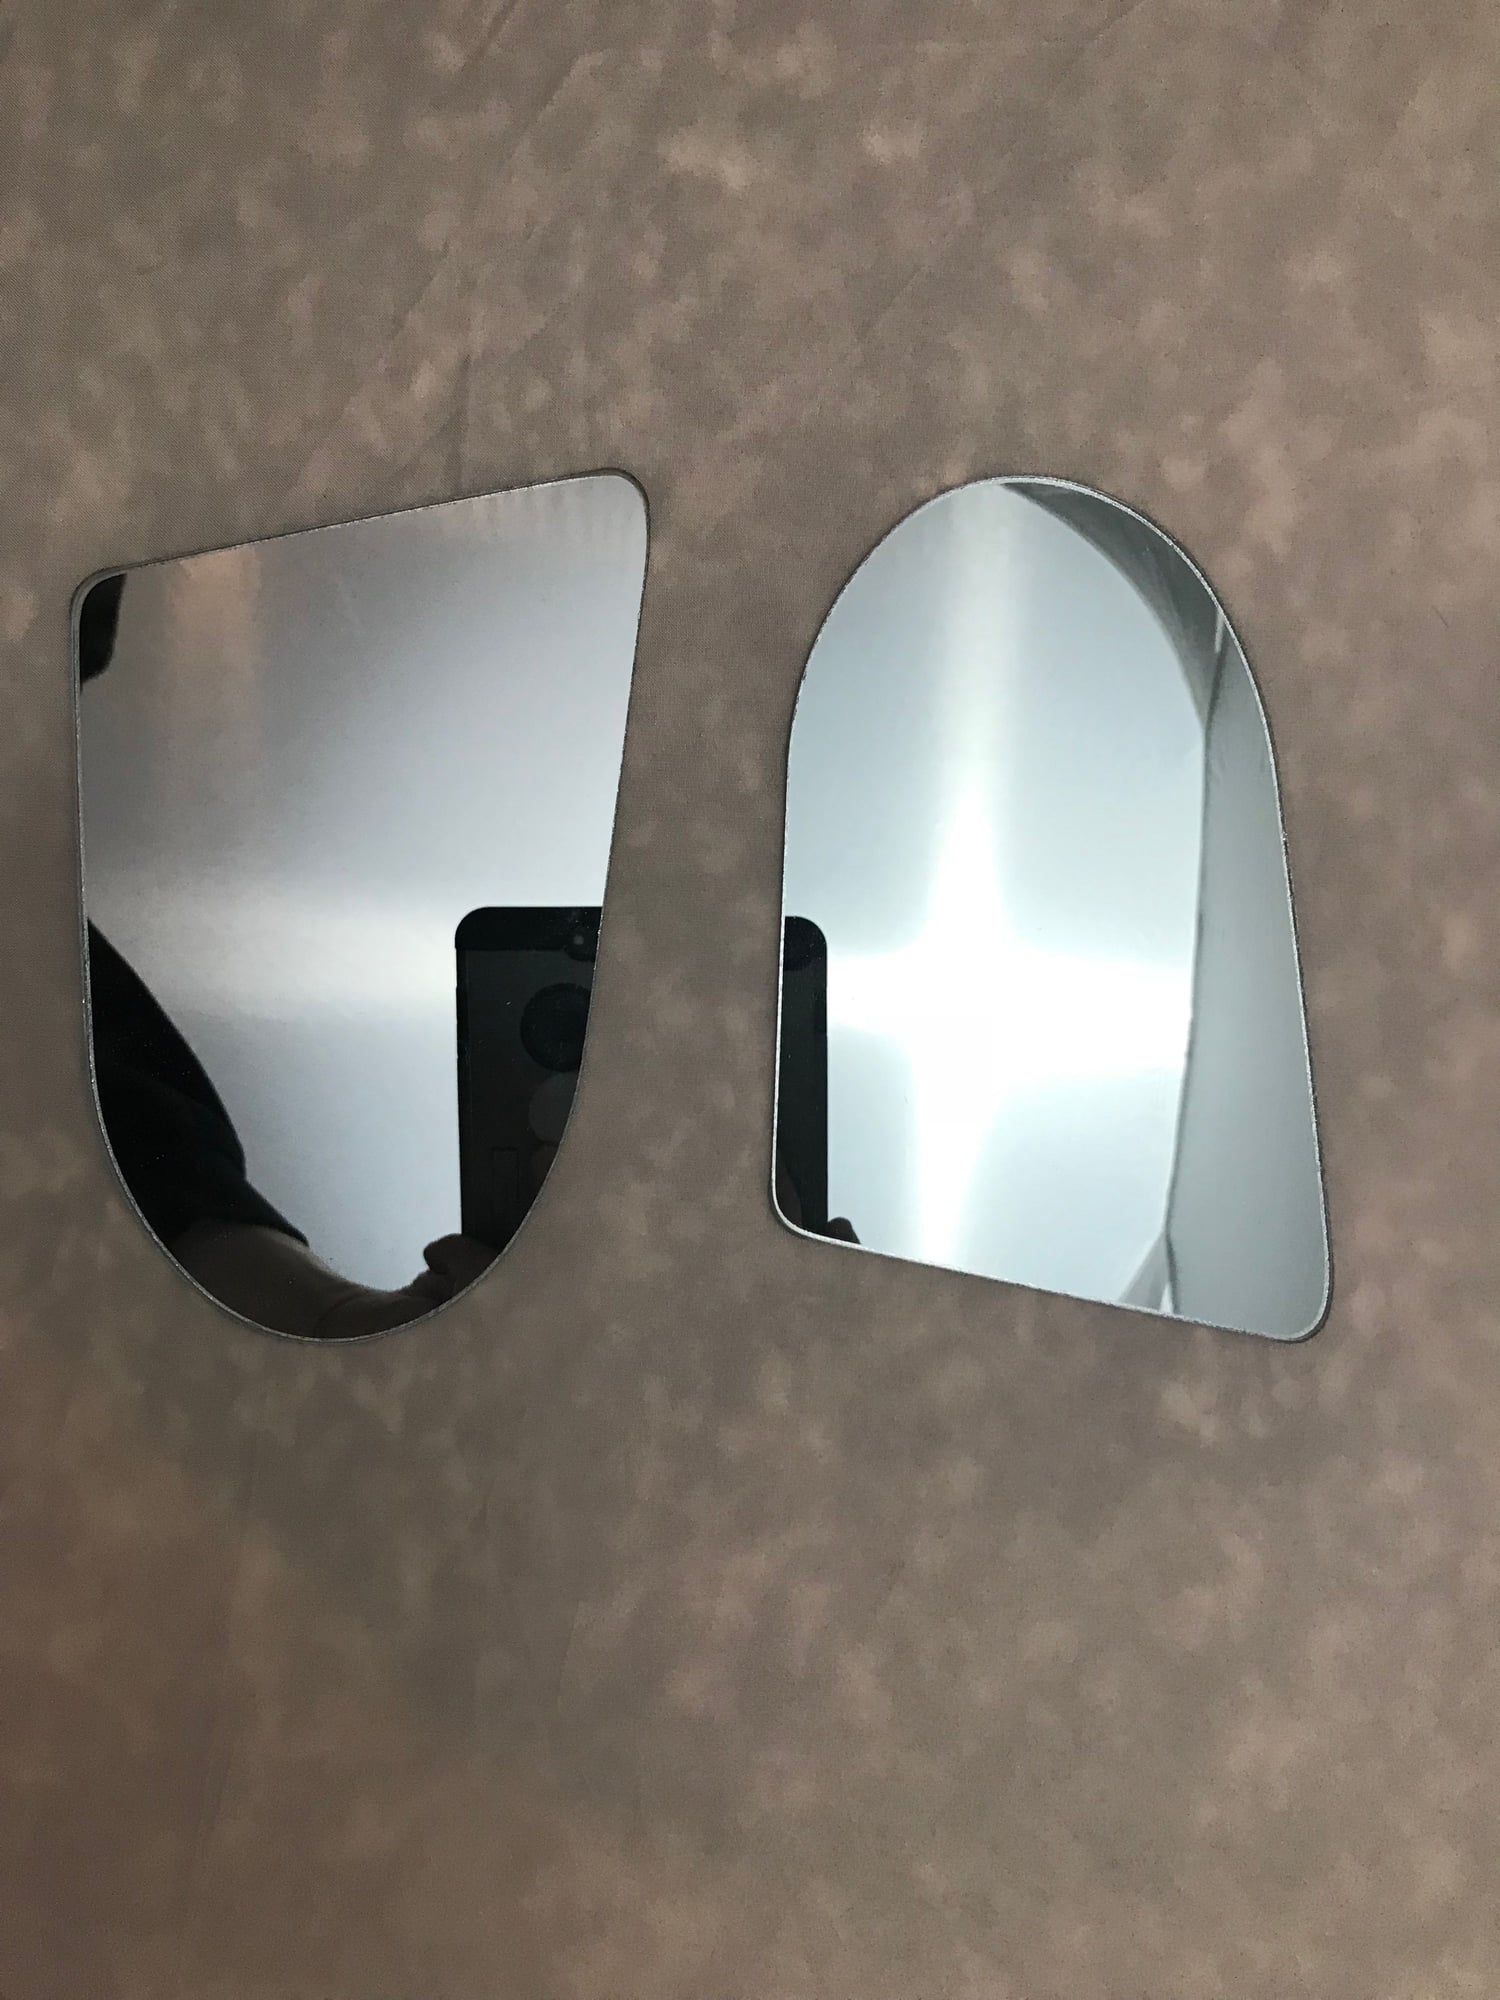 Exterior Body Parts - Ganador Mirror Glass - LHD, Blue Tint - New - All Years Any Make All Models - Pontiac, MI 48341, United States